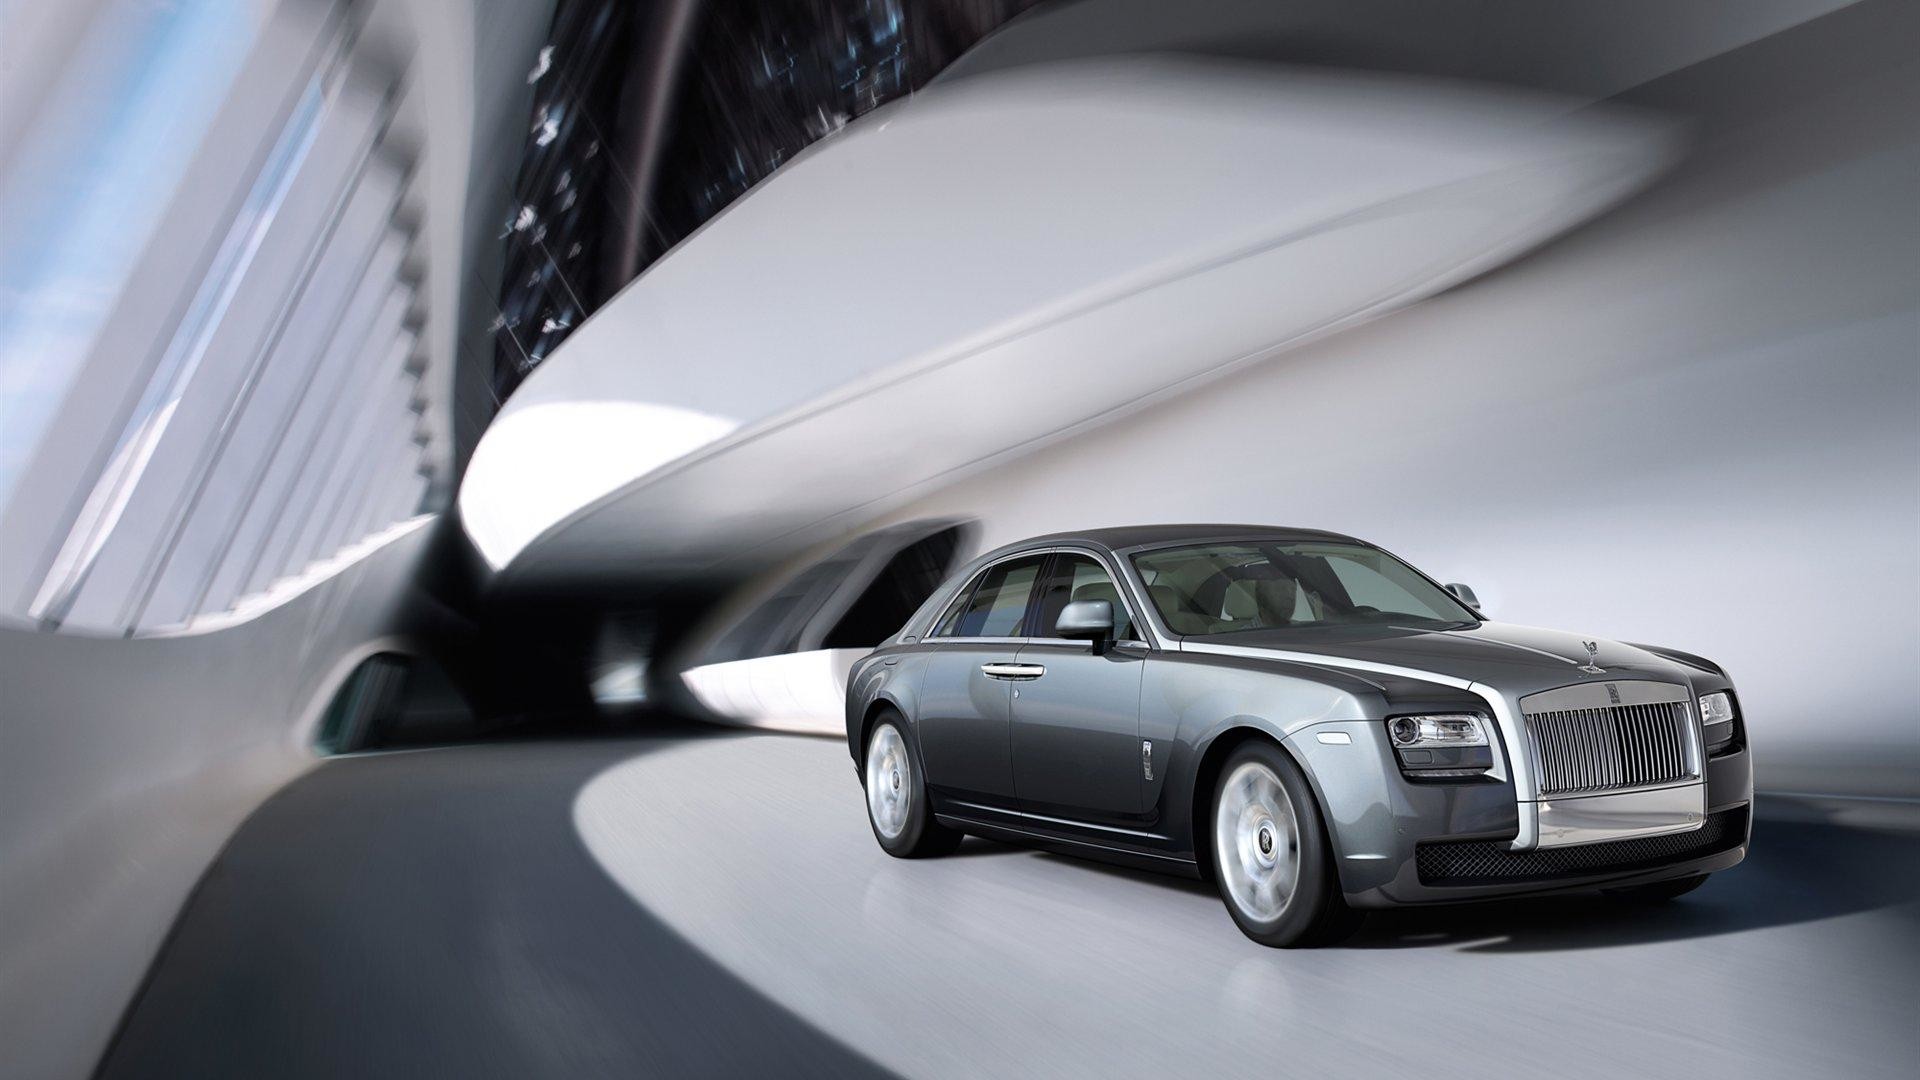 1920x1080  2012 Rolls-Royce Ghost Wallpaper and Image Gallery